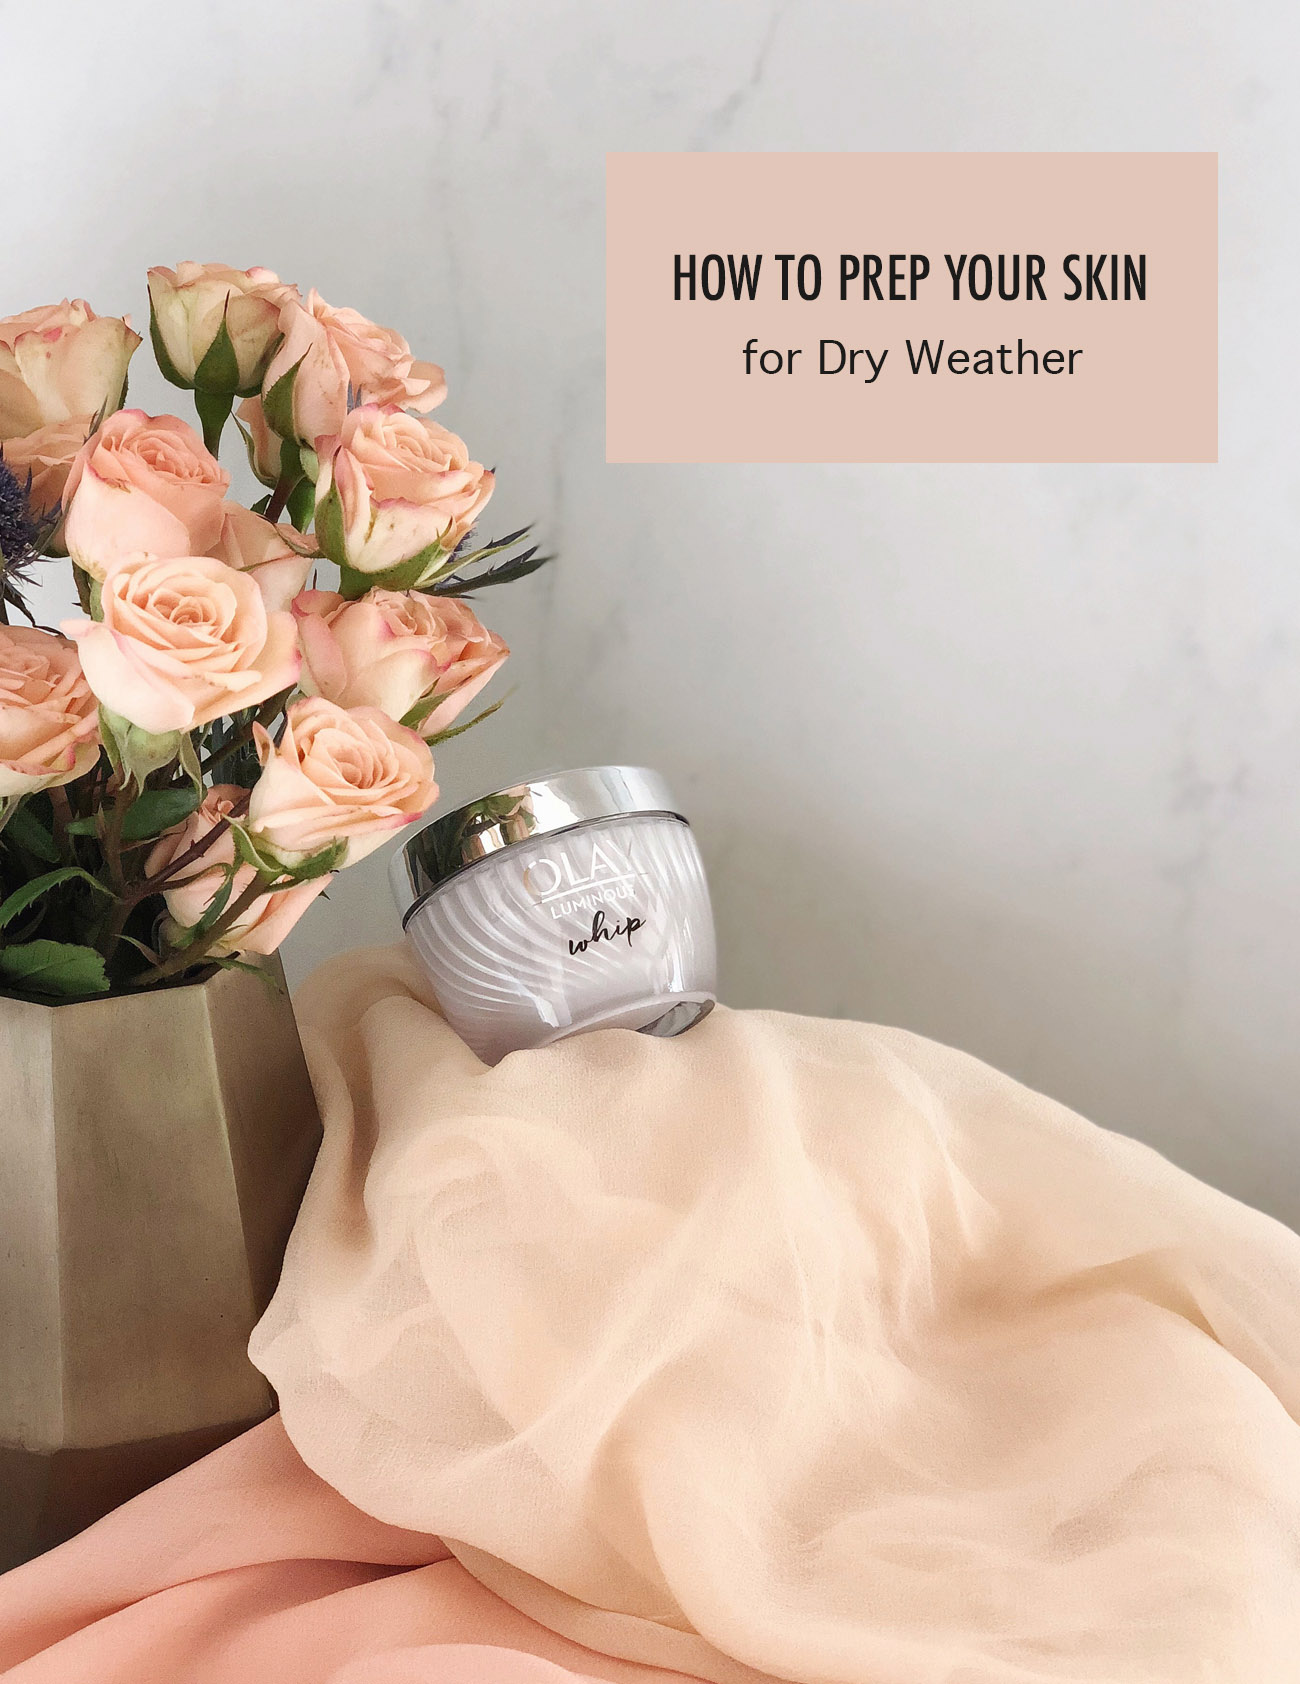 How to Prep Your Skin for Dry Weather